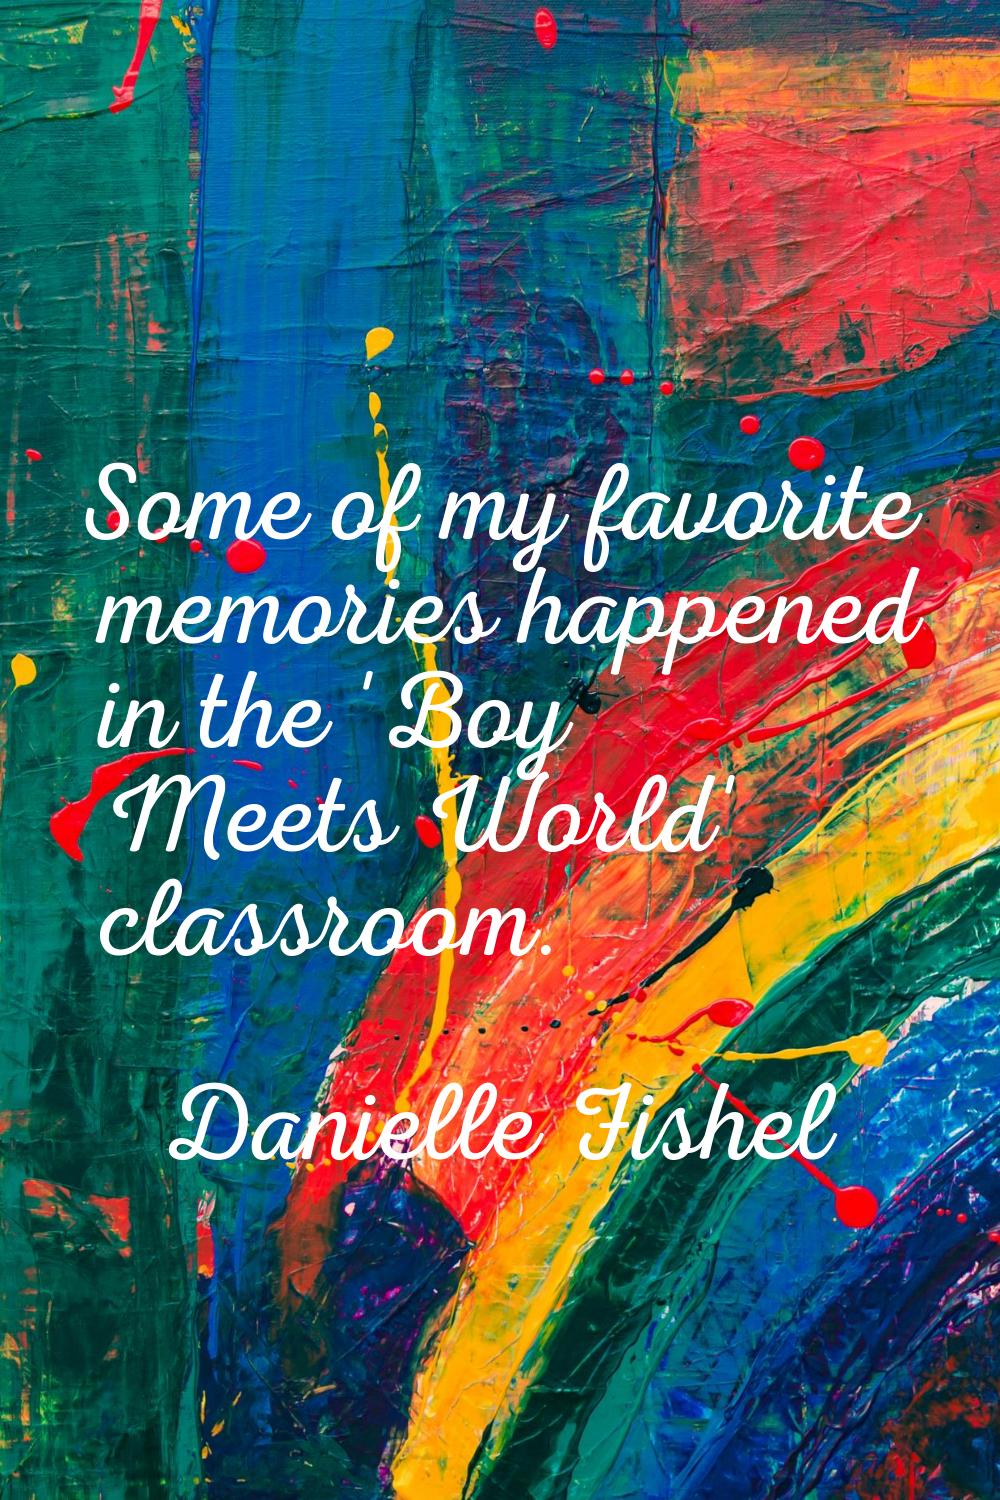 Some of my favorite memories happened in the 'Boy Meets World' classroom.